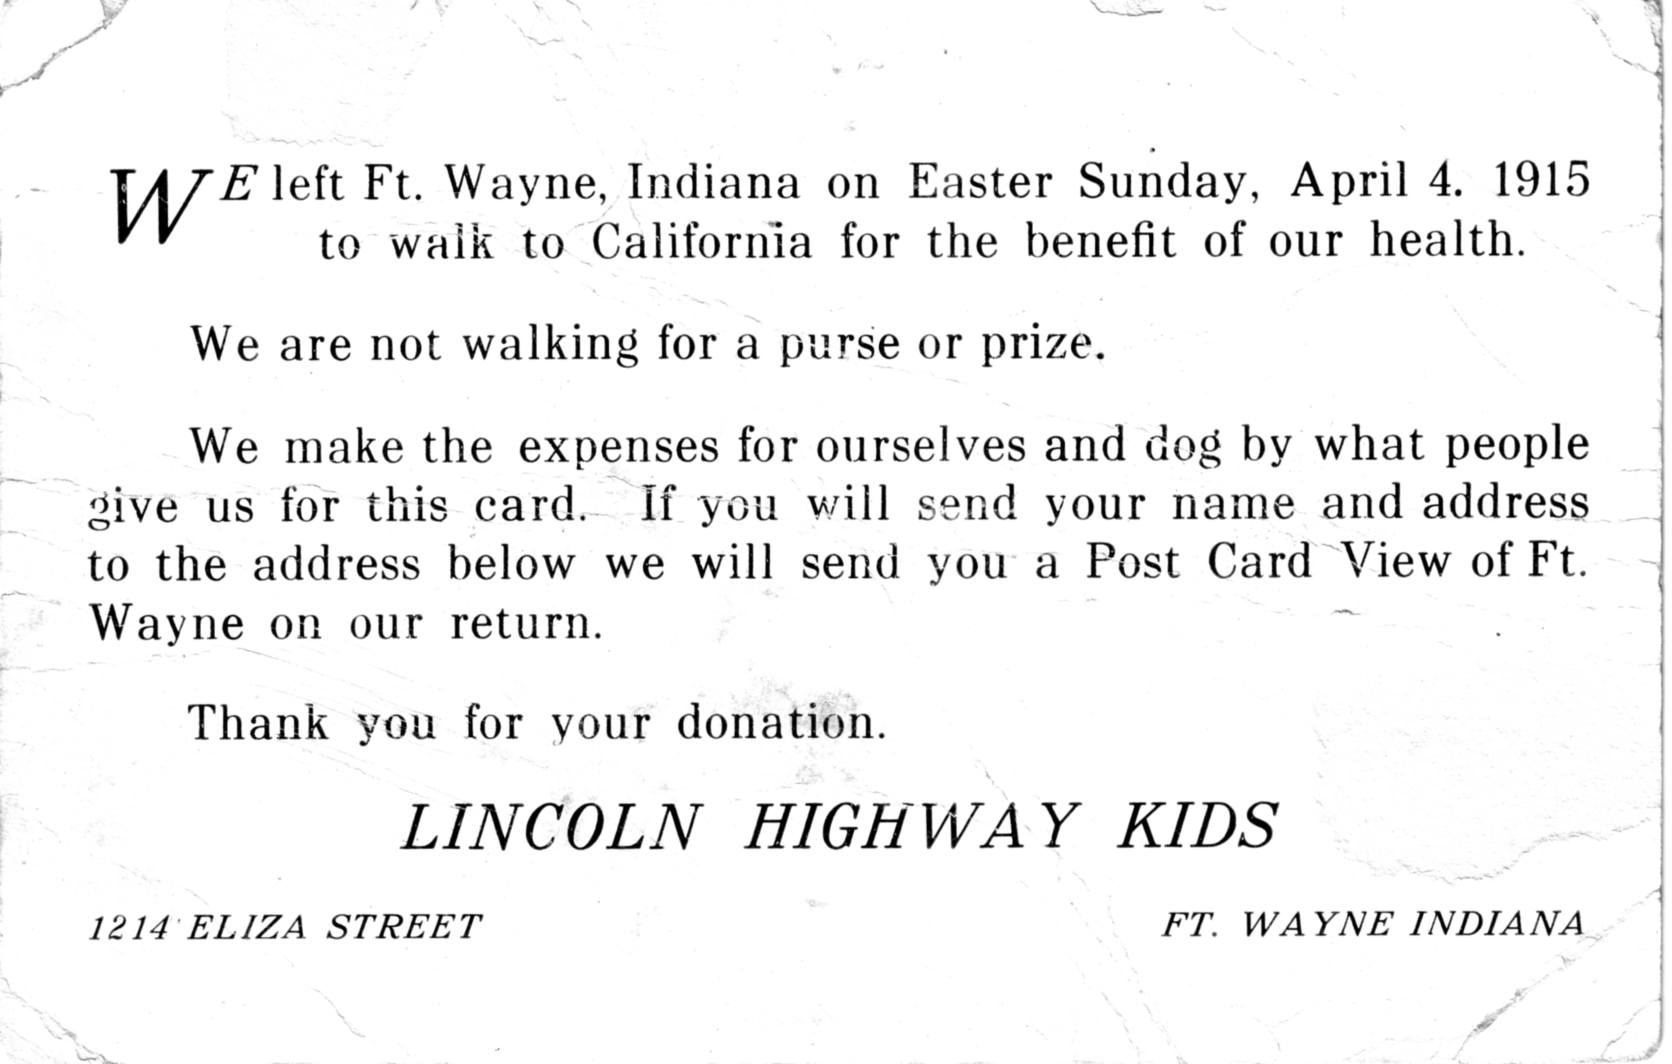 Lincoln Highway Kids from Fort Wayne